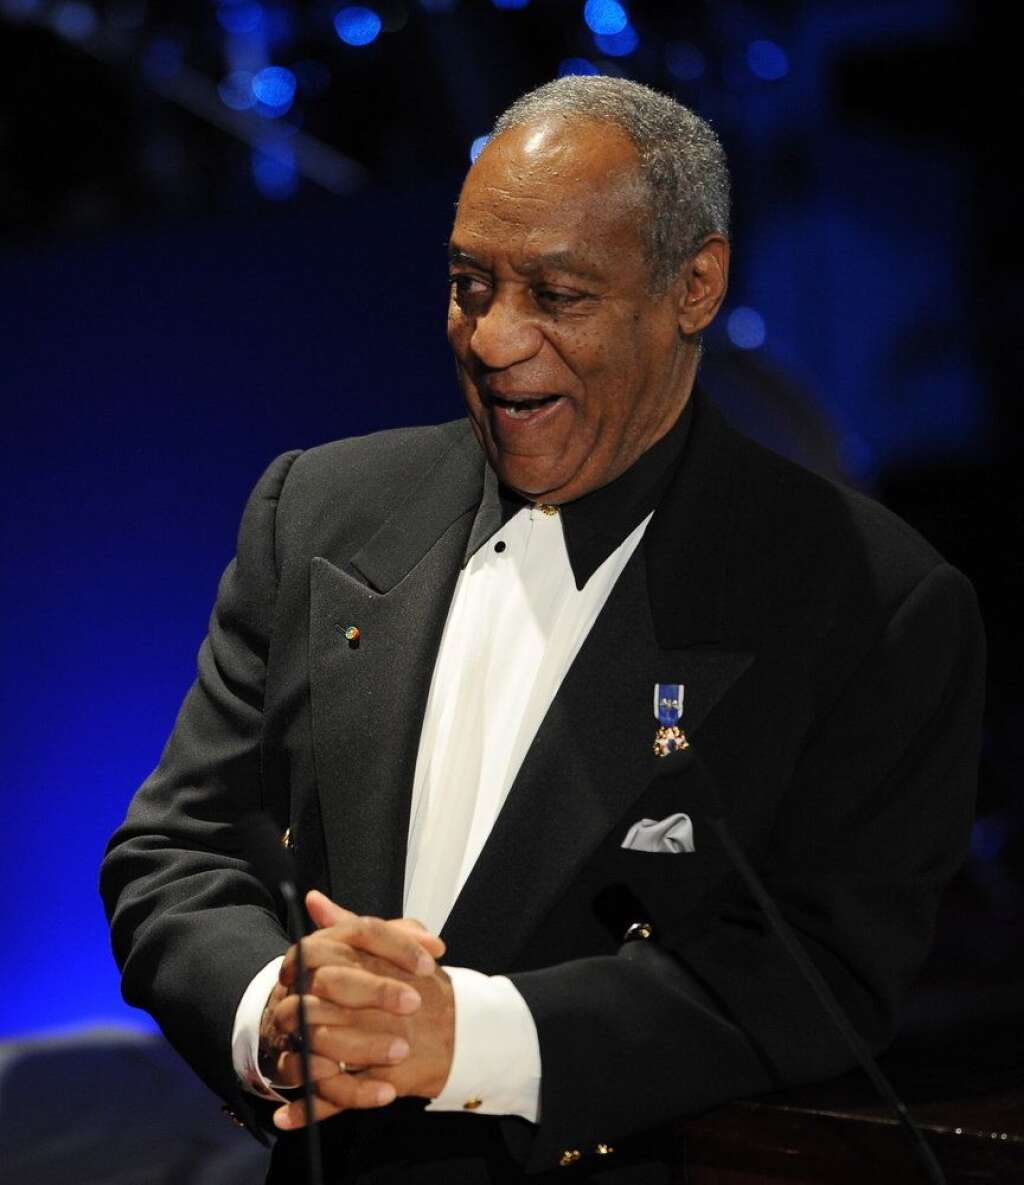 Bill Cosby - 8. Fortune estimée : 380 millions de dollars  Source : <a href="http://www.wealthx.com/articles/2014/top-10-hollywood-and-bollywood-actors%E2%80%8B/" target="_blank">Wealth-X</a>